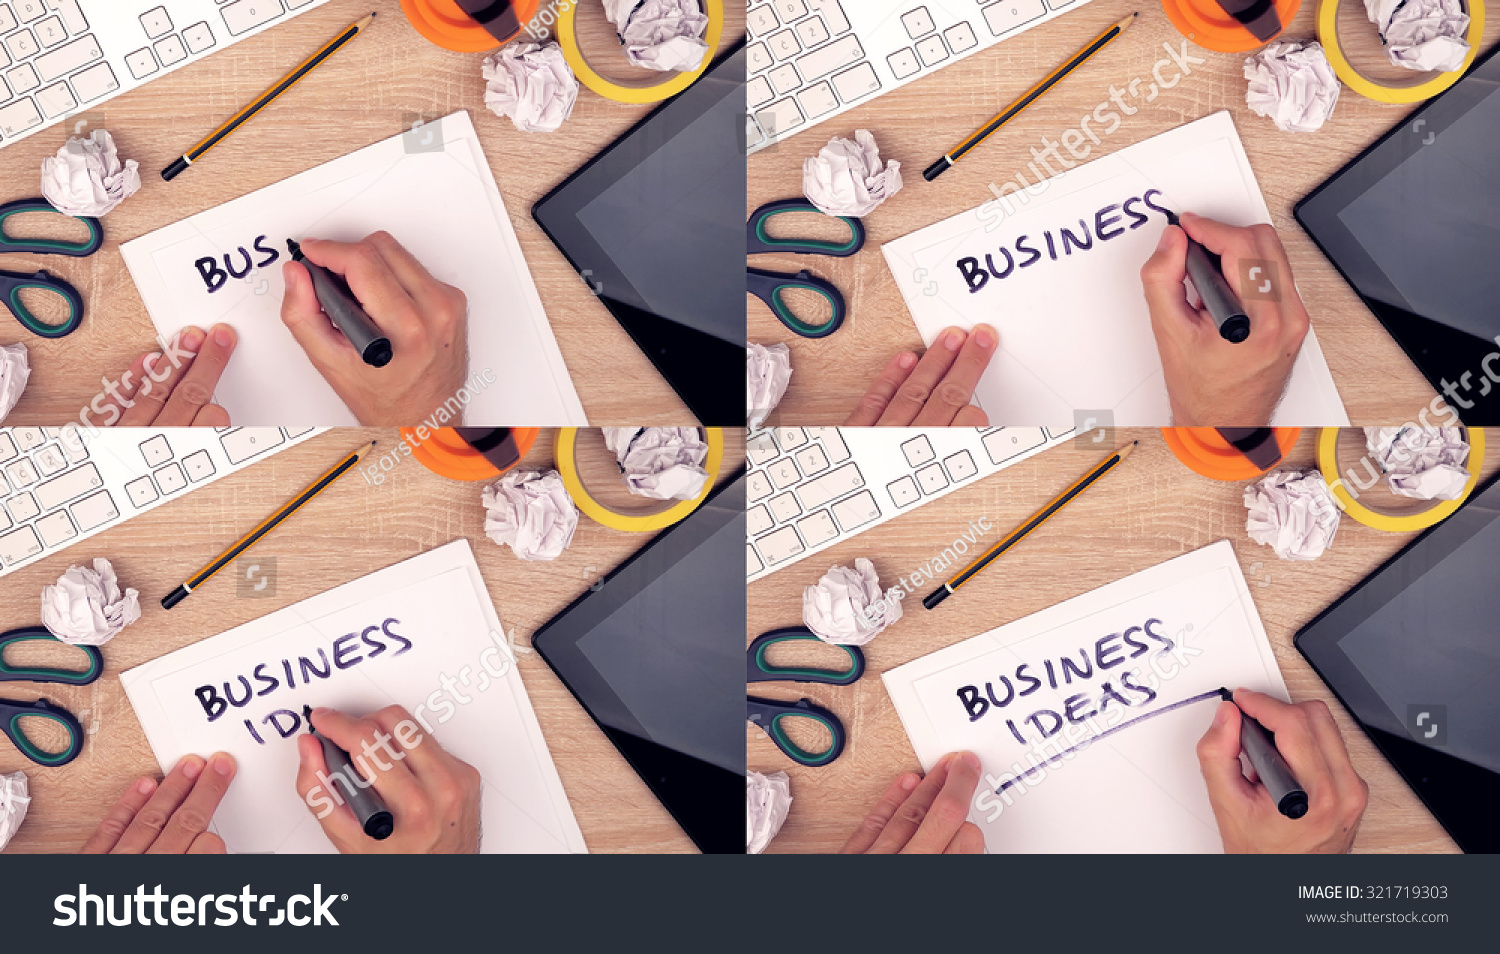 Business ideas, businessman writing ideas on paper, top view of business workspace, image sequence collage #321719303